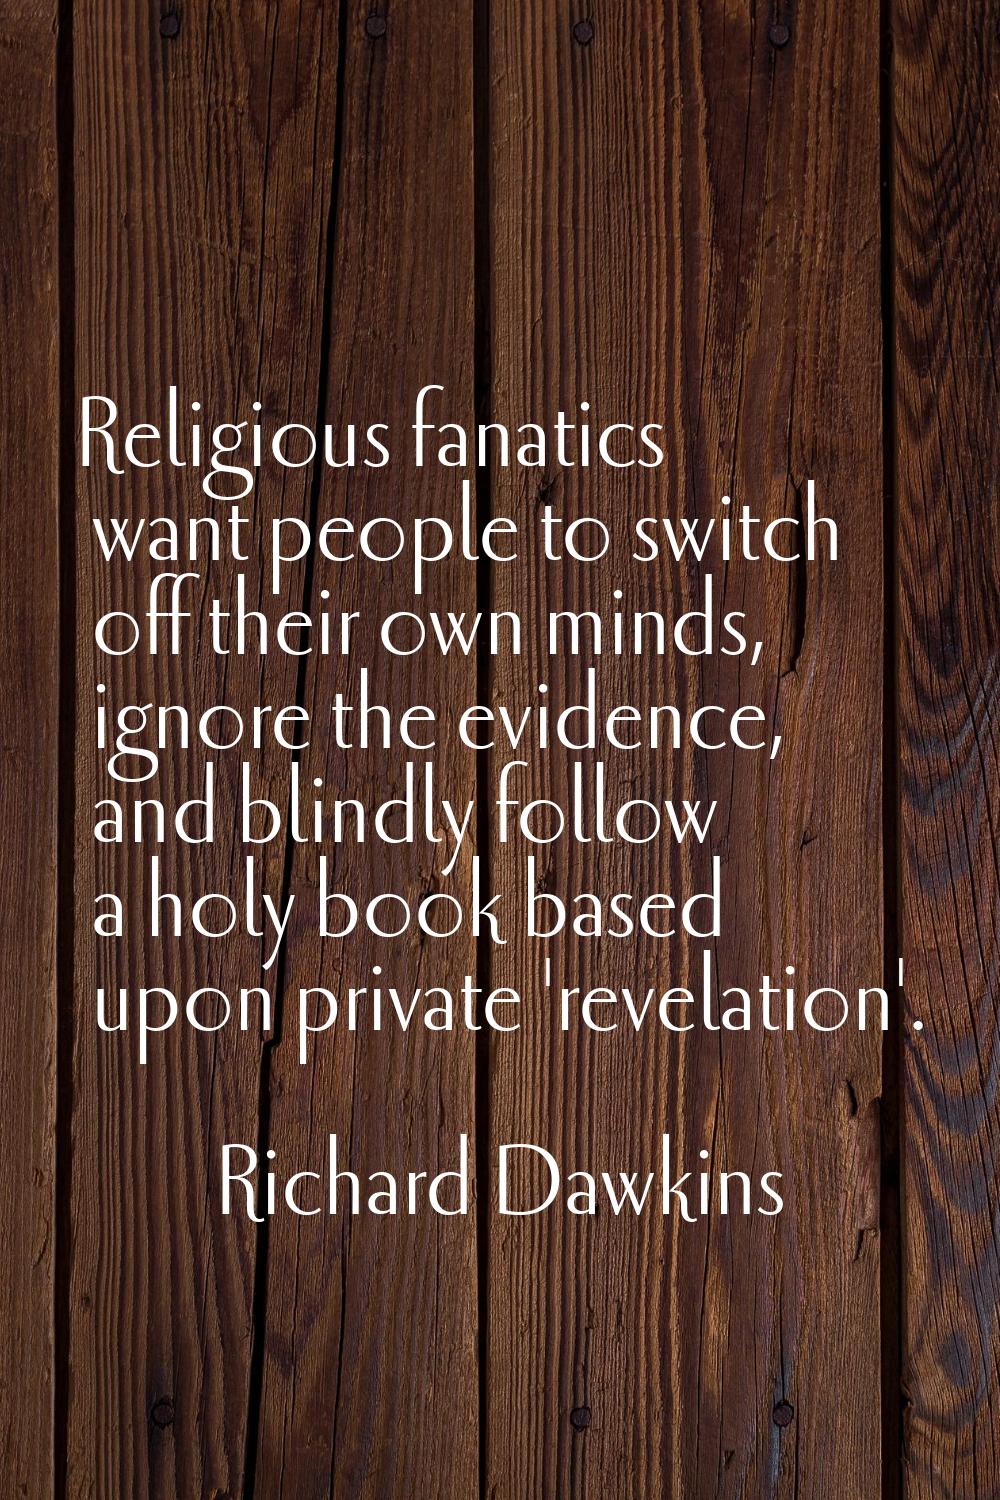 Religious fanatics want people to switch off their own minds, ignore the evidence, and blindly foll